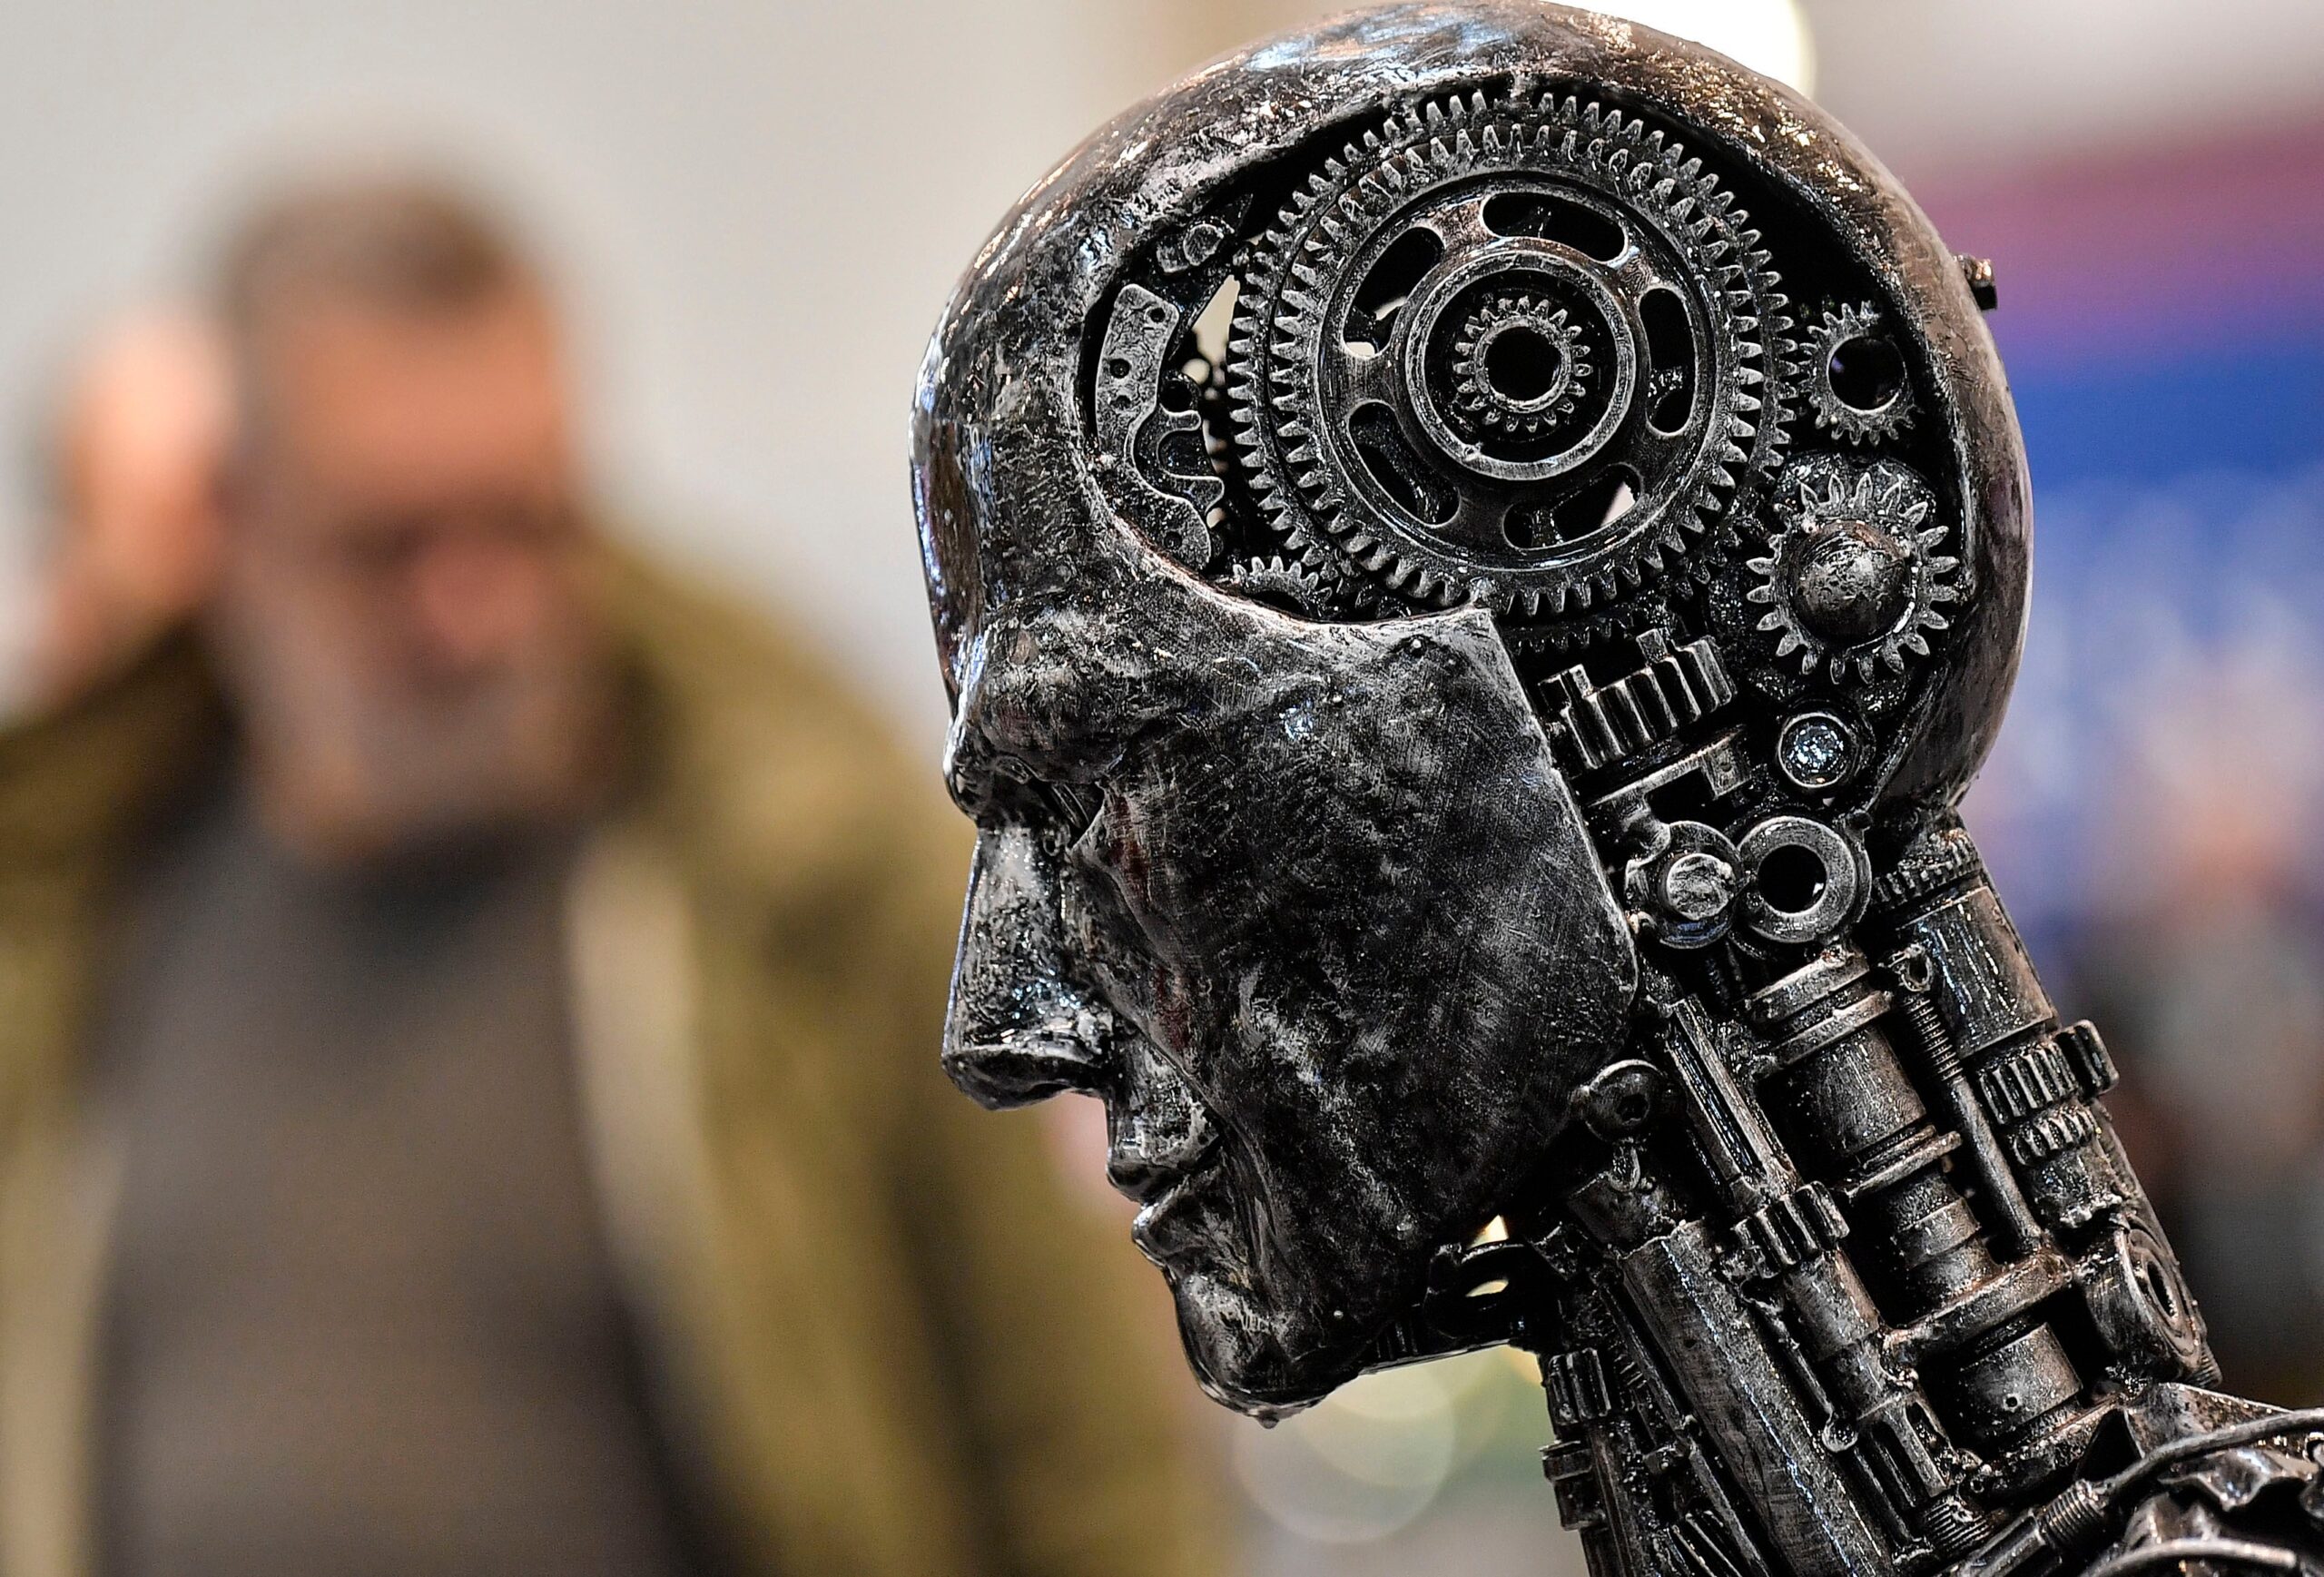 A metal head made of motor parts symbolizes artificial intelligence